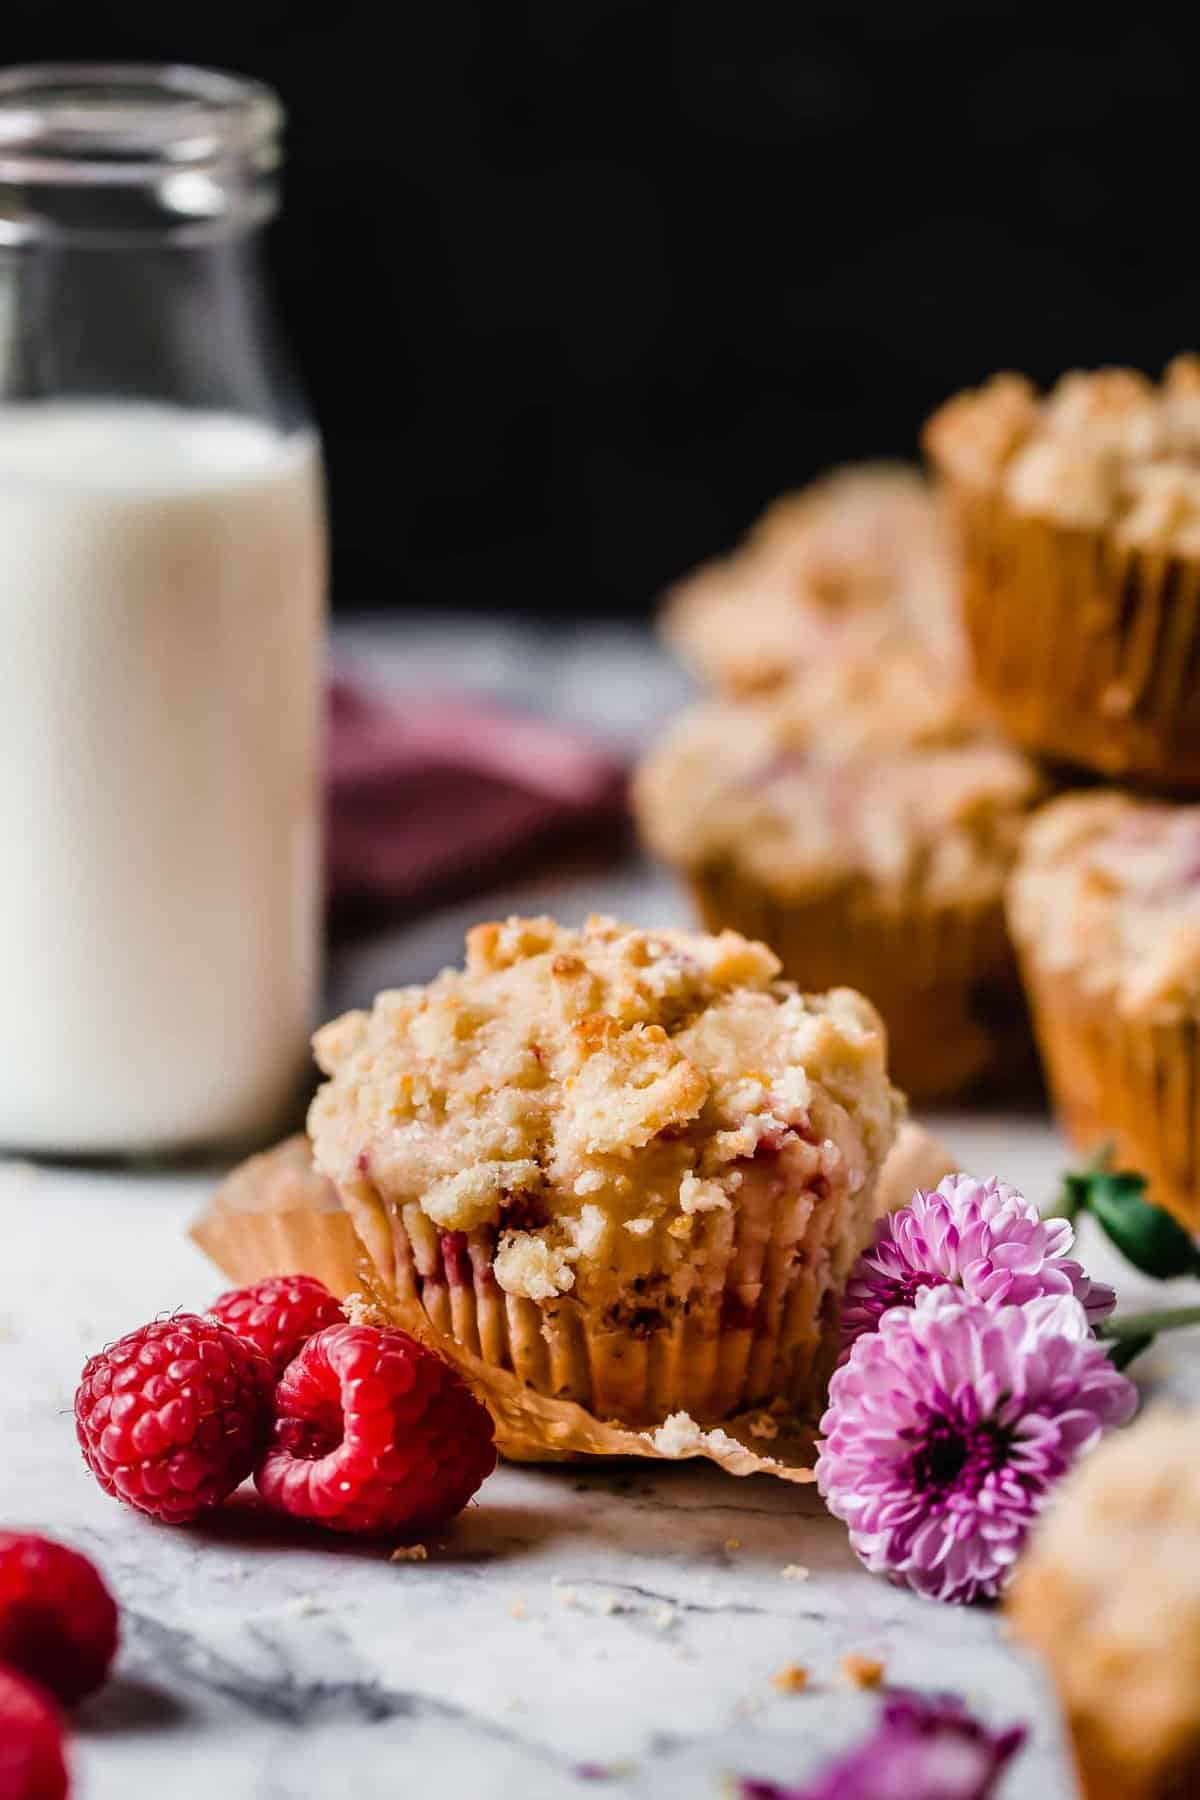 Raspberry Lemon Streusel Muffins that make your kitchen smell like a warm, sunny day. These are the perfect breakfast treat!